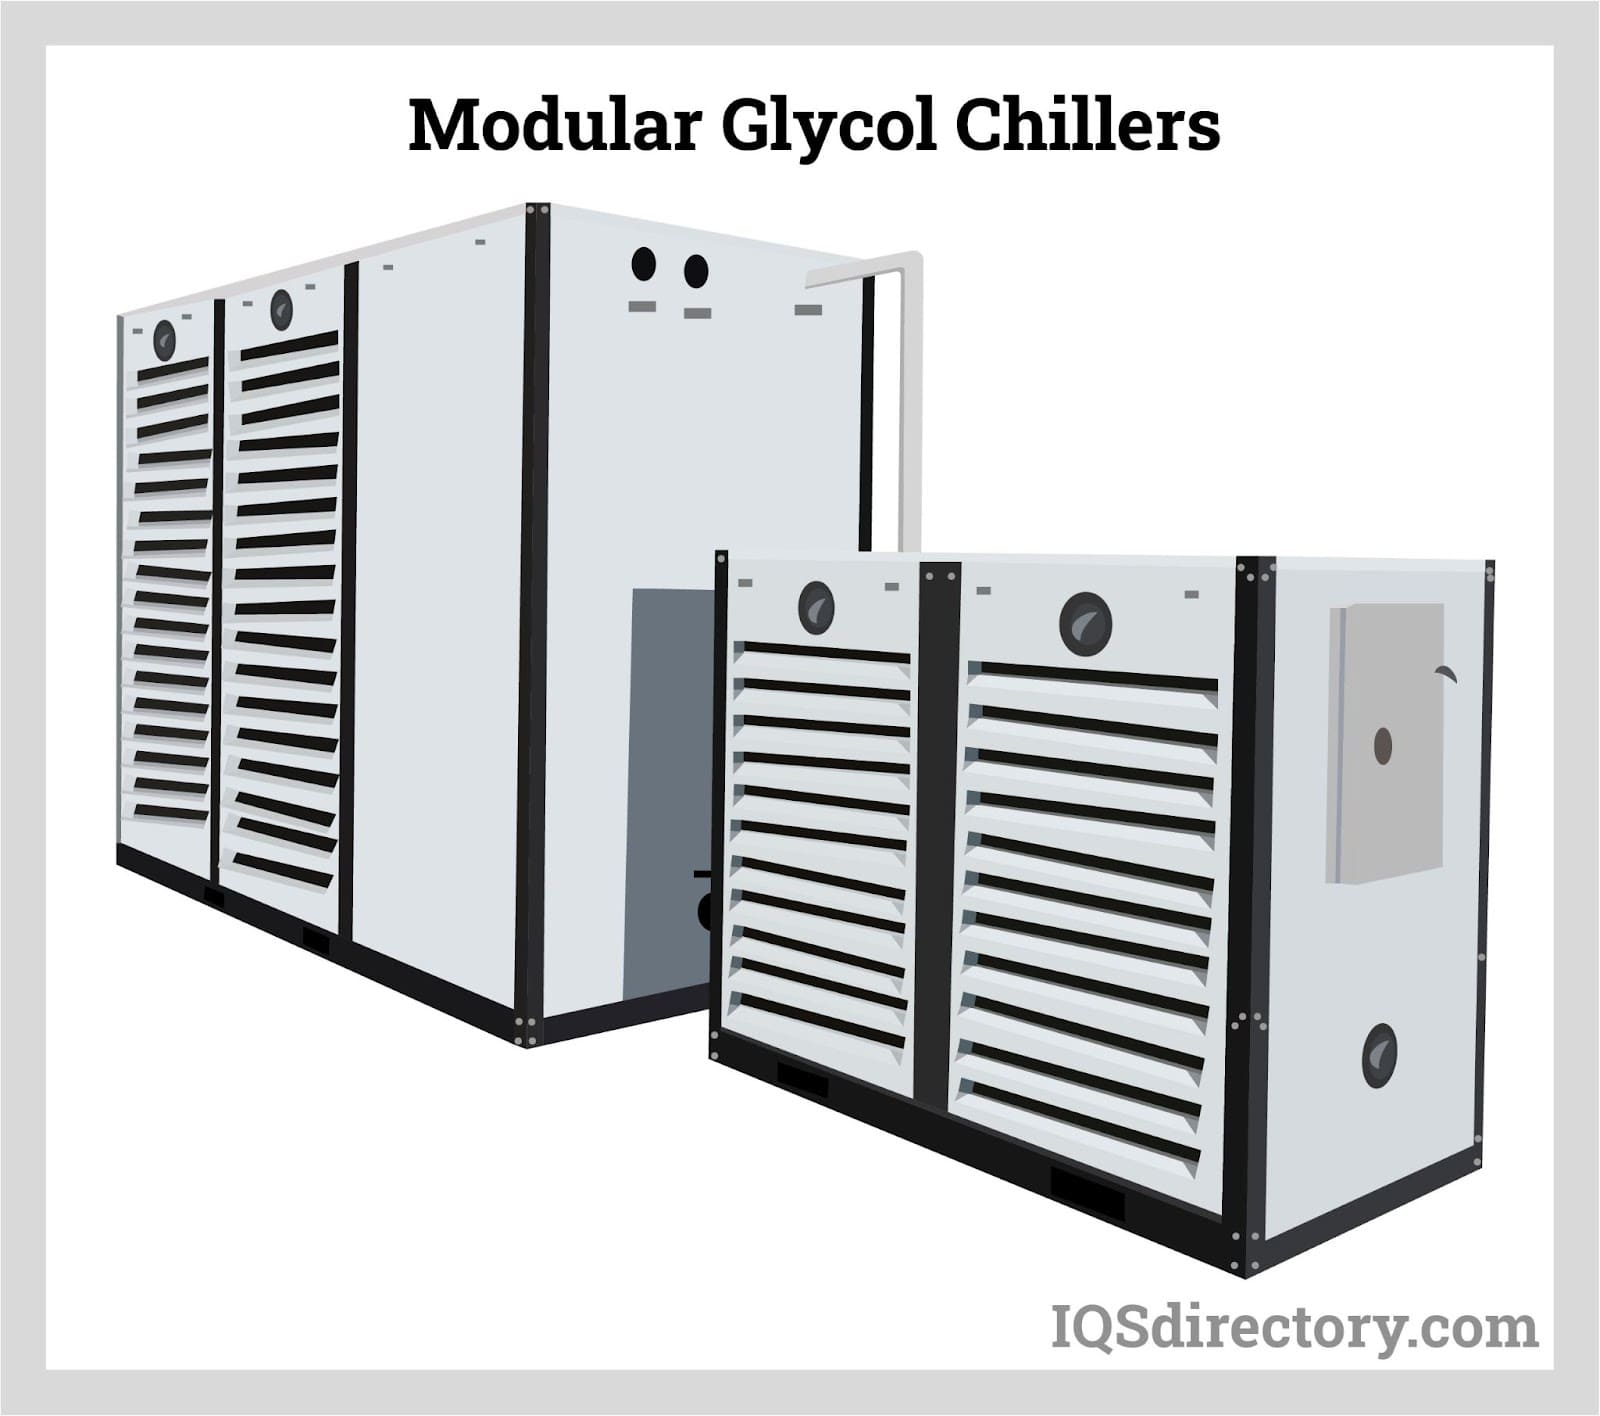 Modular Glycol Chillers